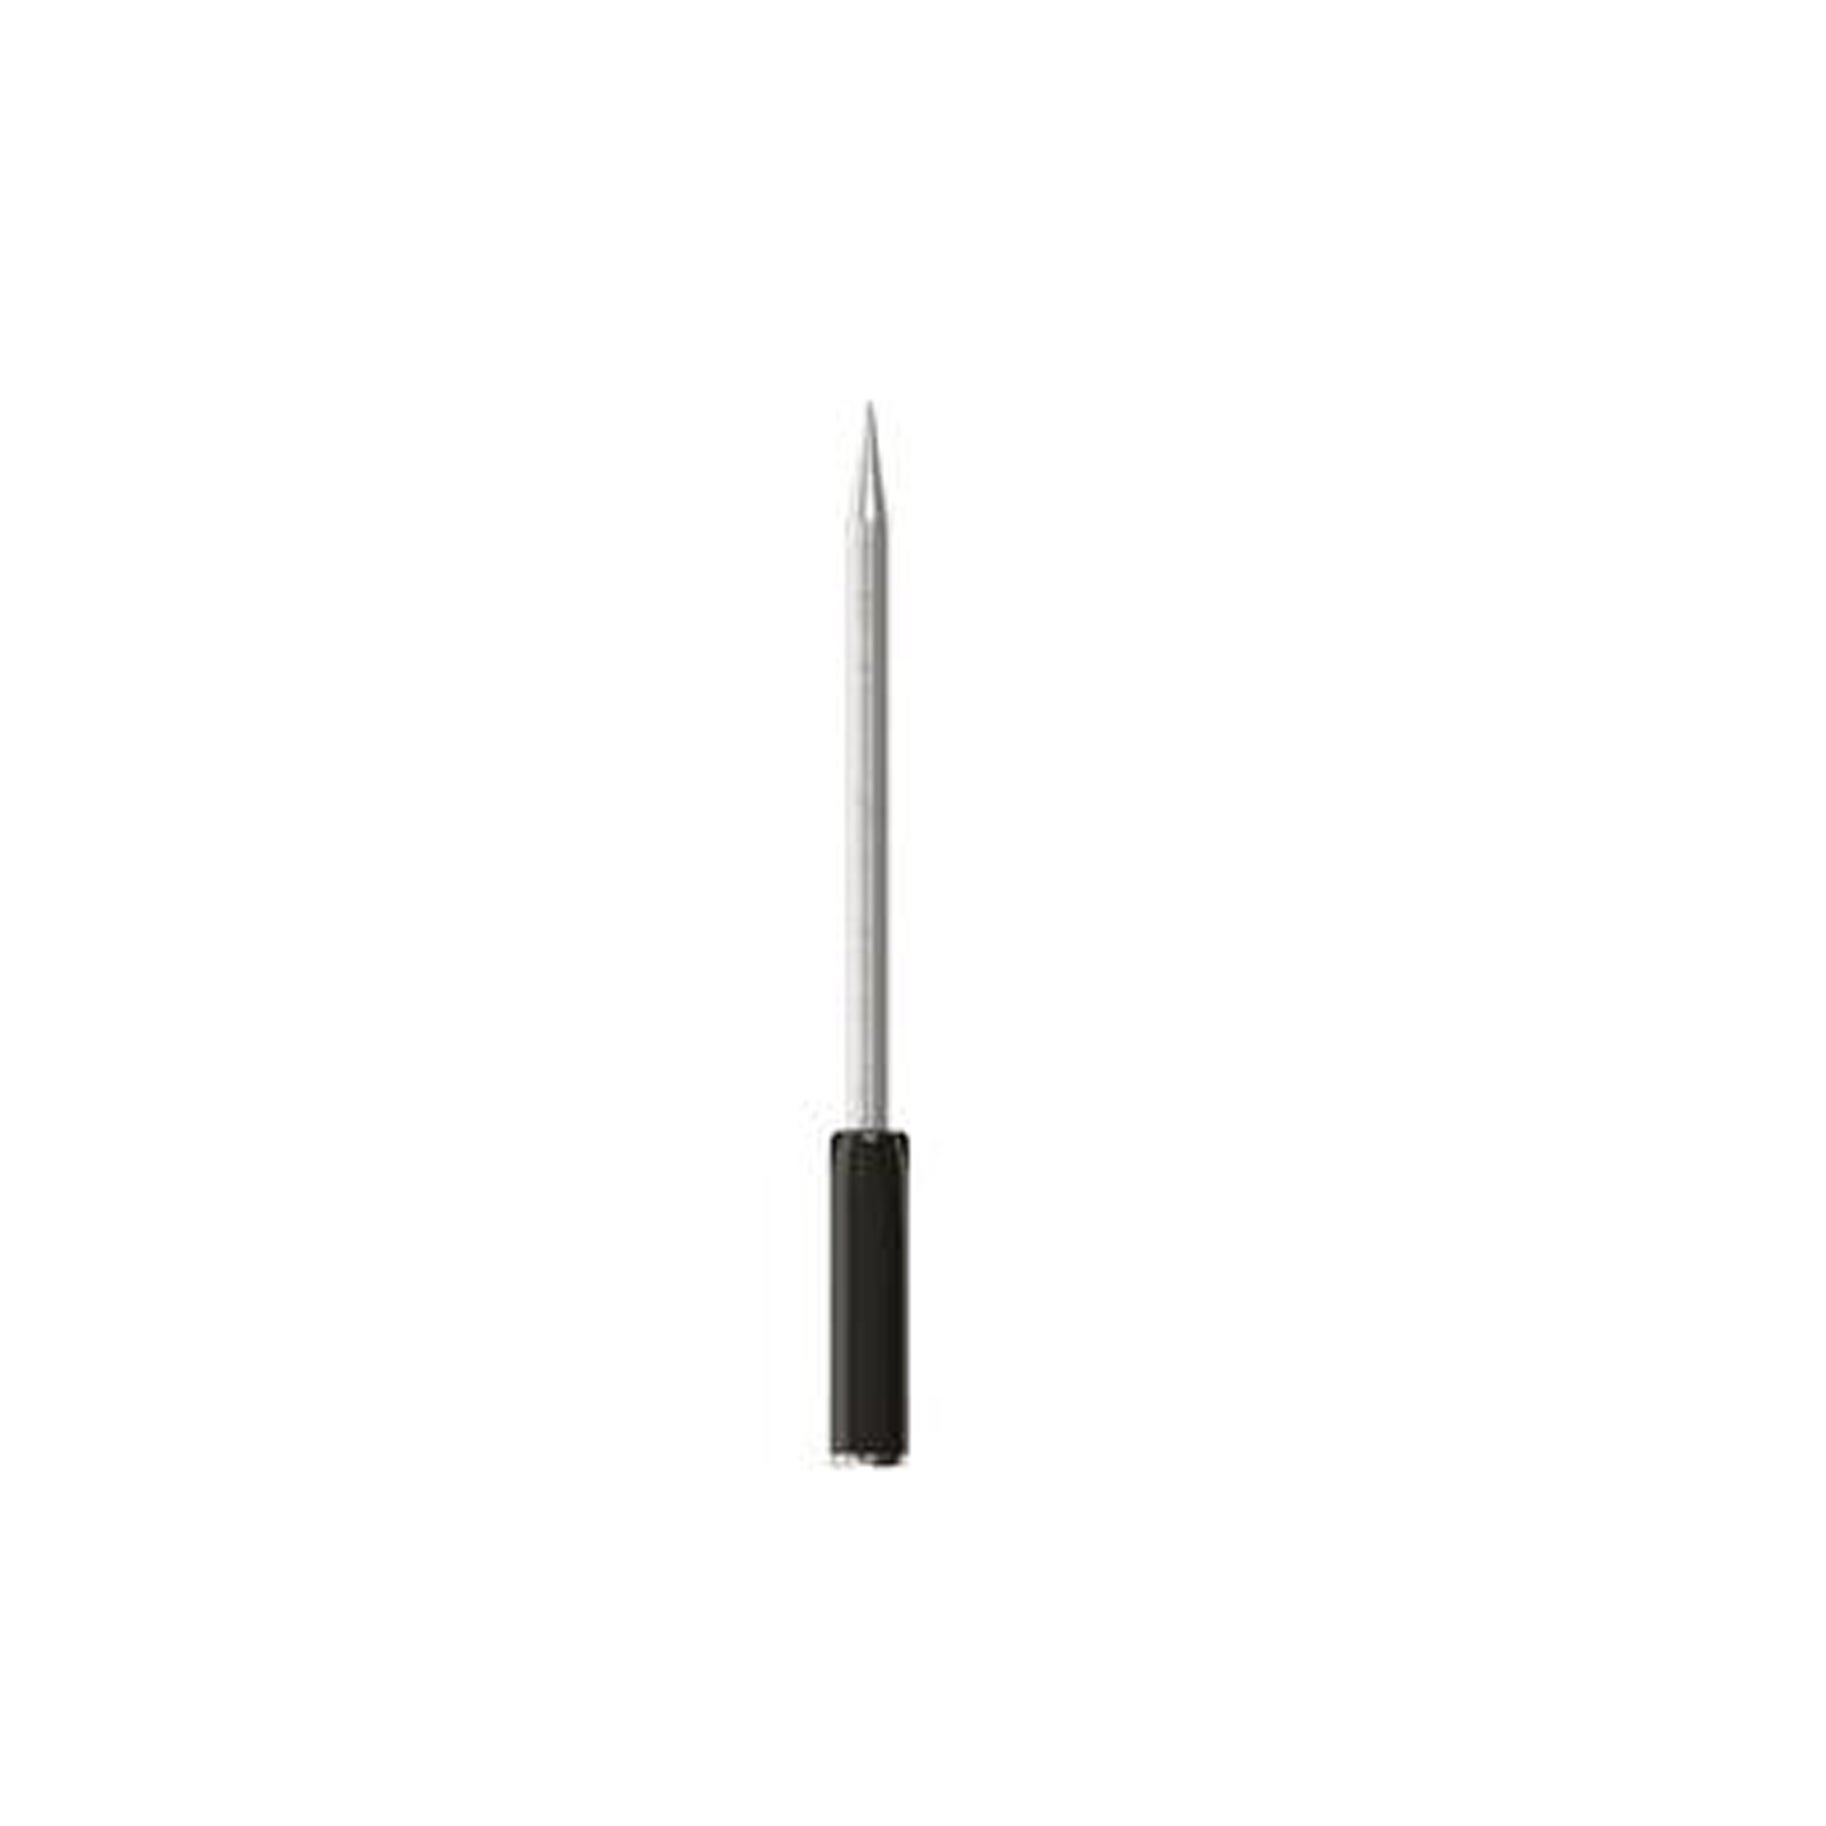 The Best Wireless Meat Thermometer Option: The MeatStick